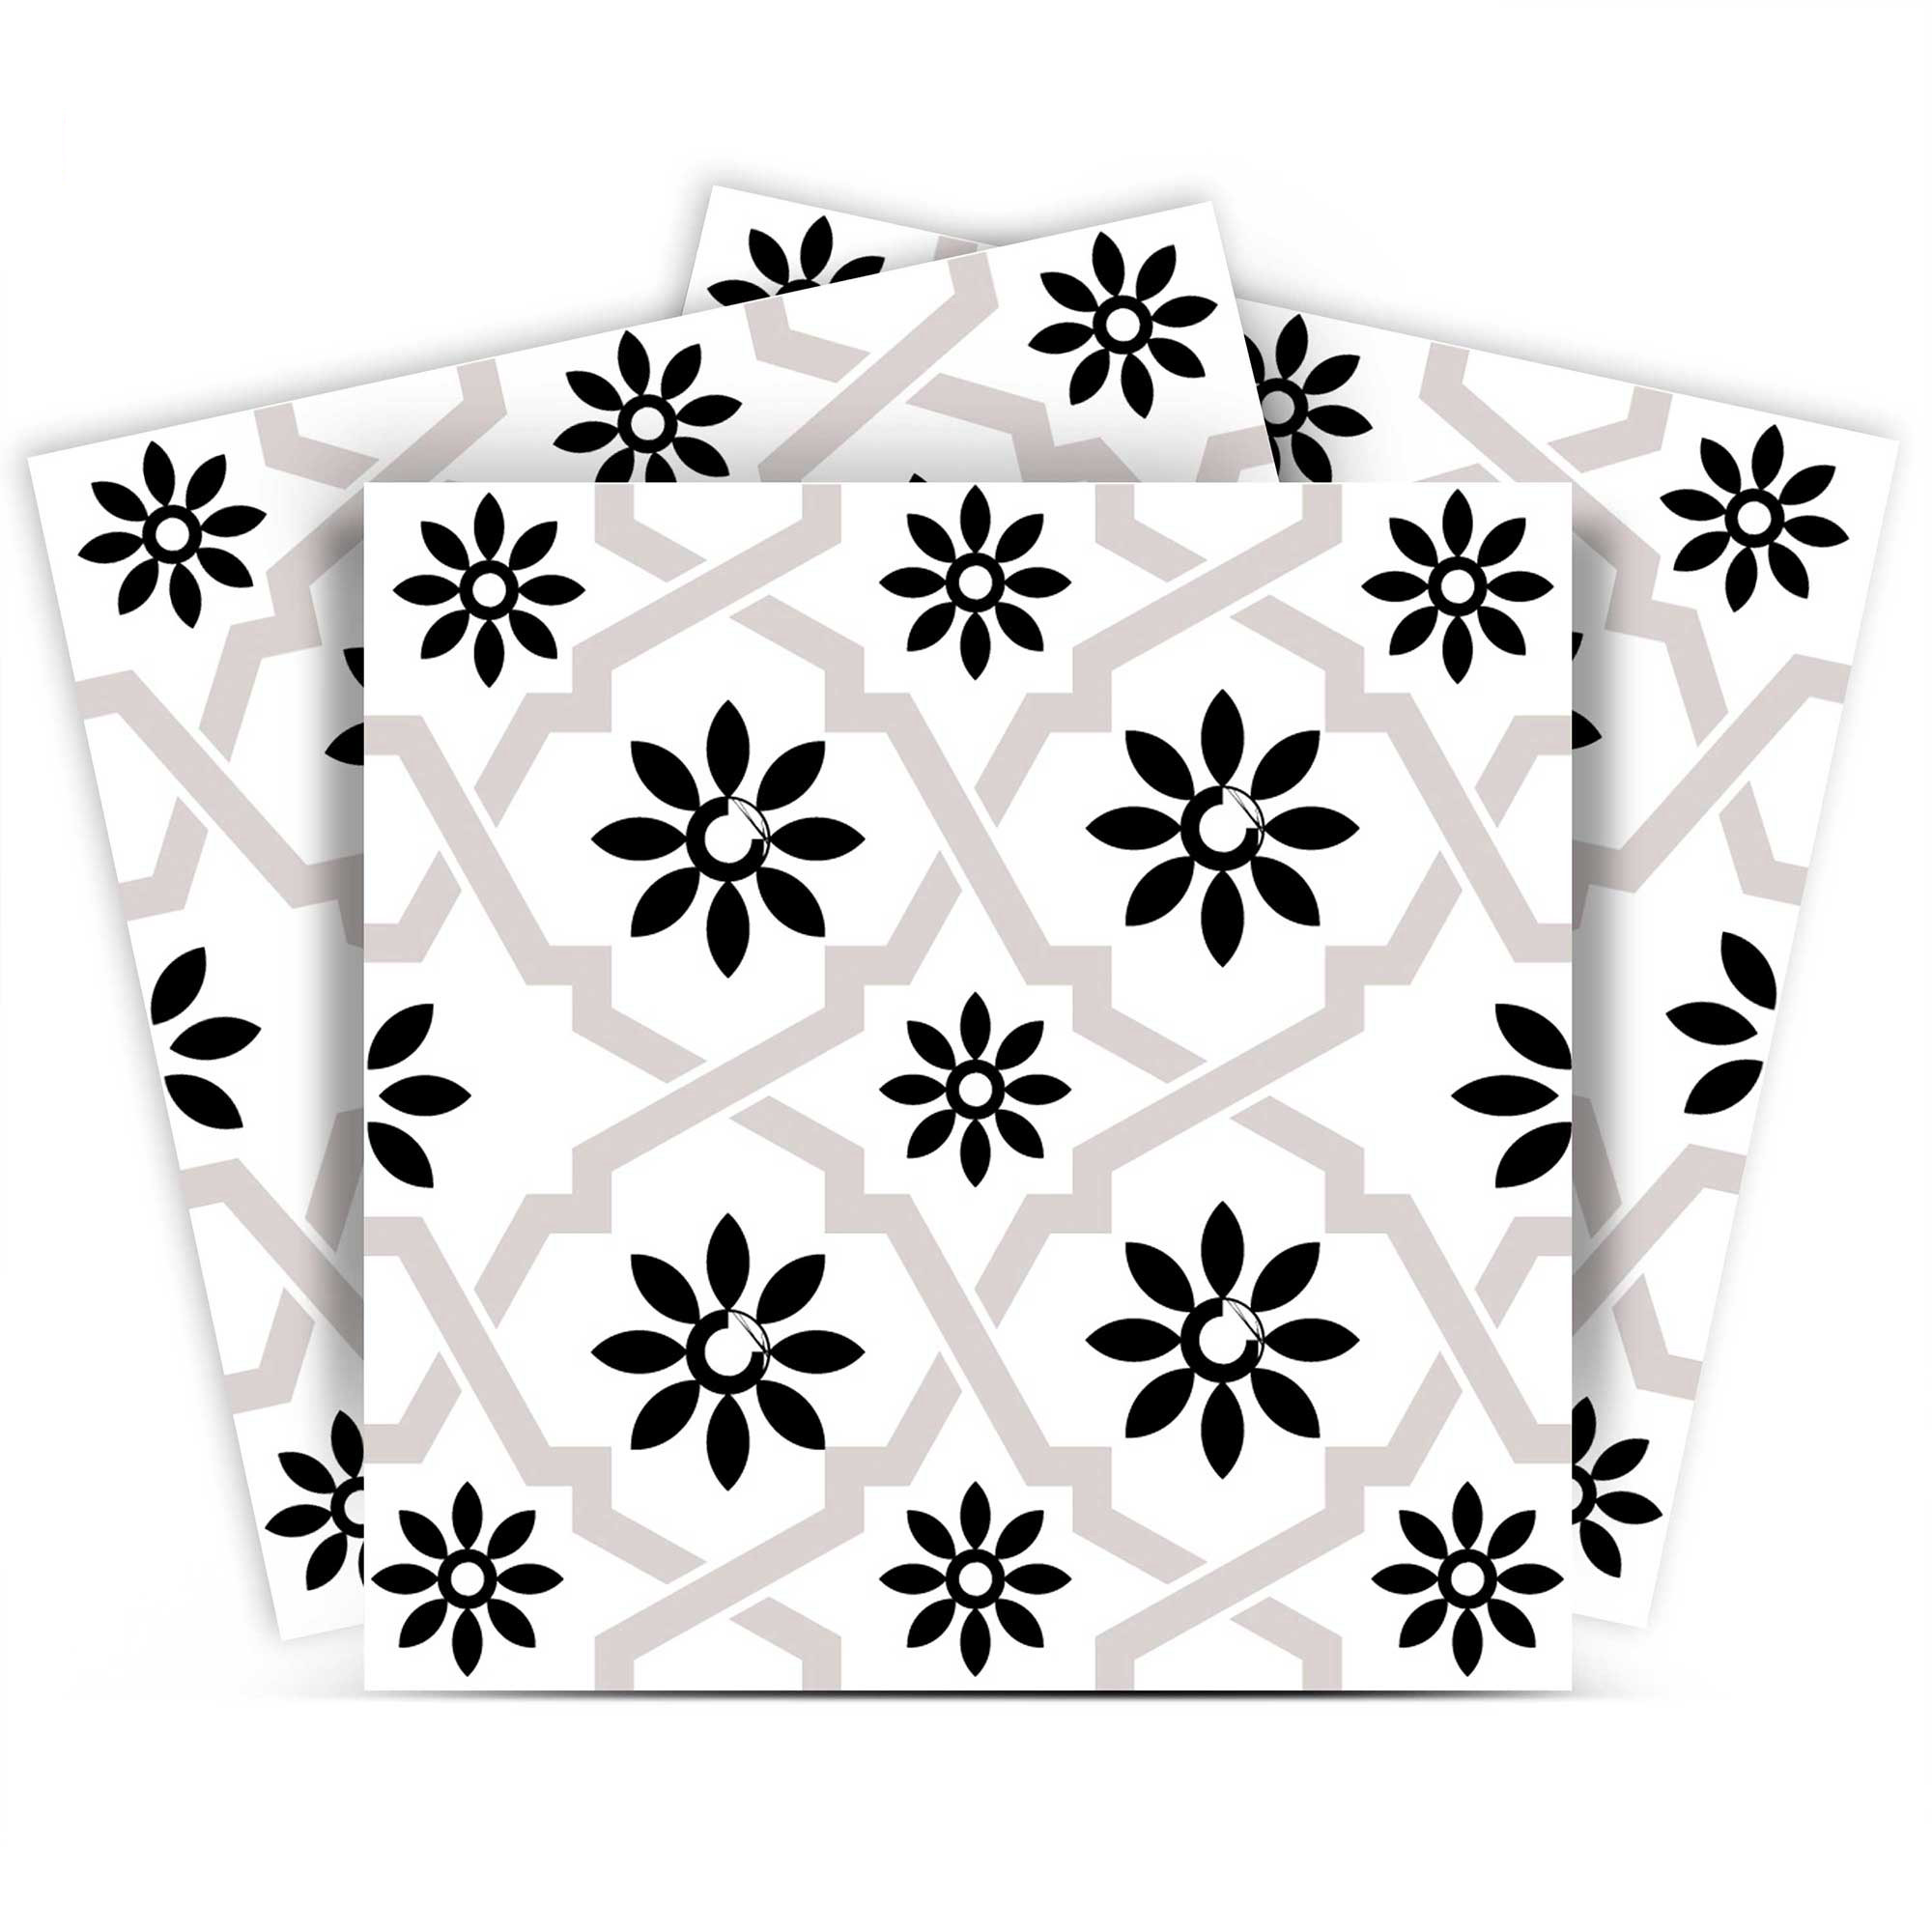 6" X 6" Black and White Lil  Daisy Peel and Stick Removable Tiles-399907-1